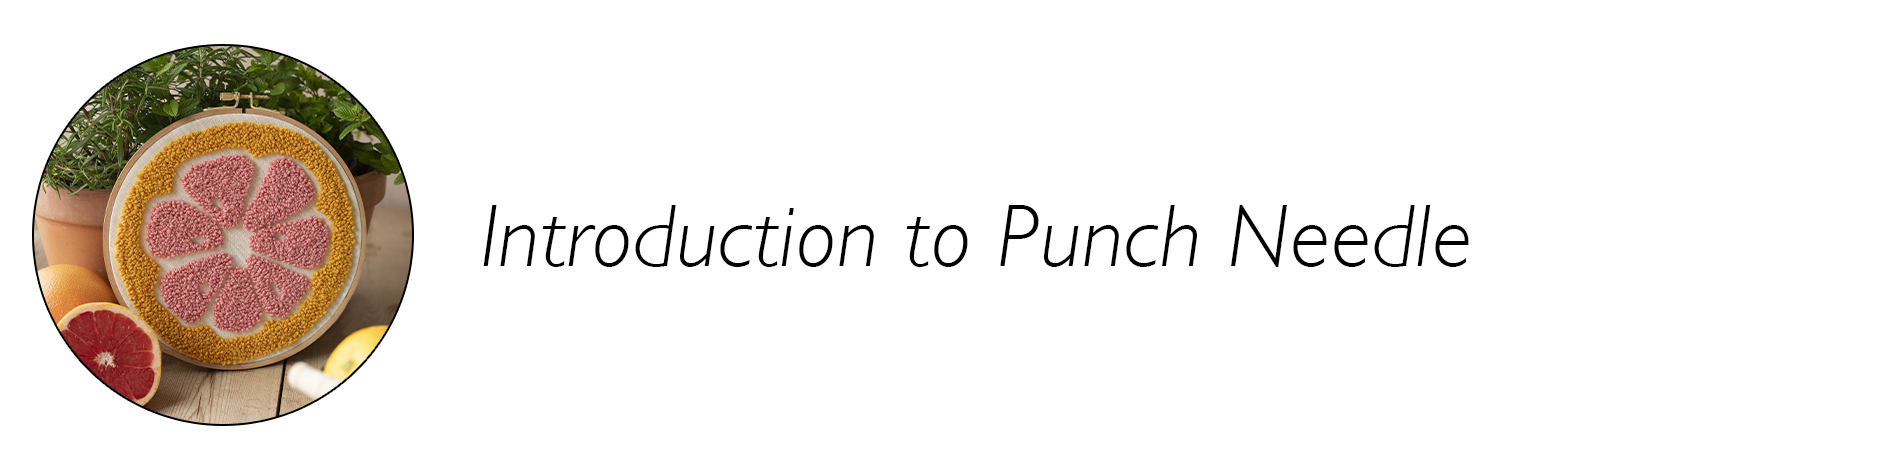 Intro to Punch Needle